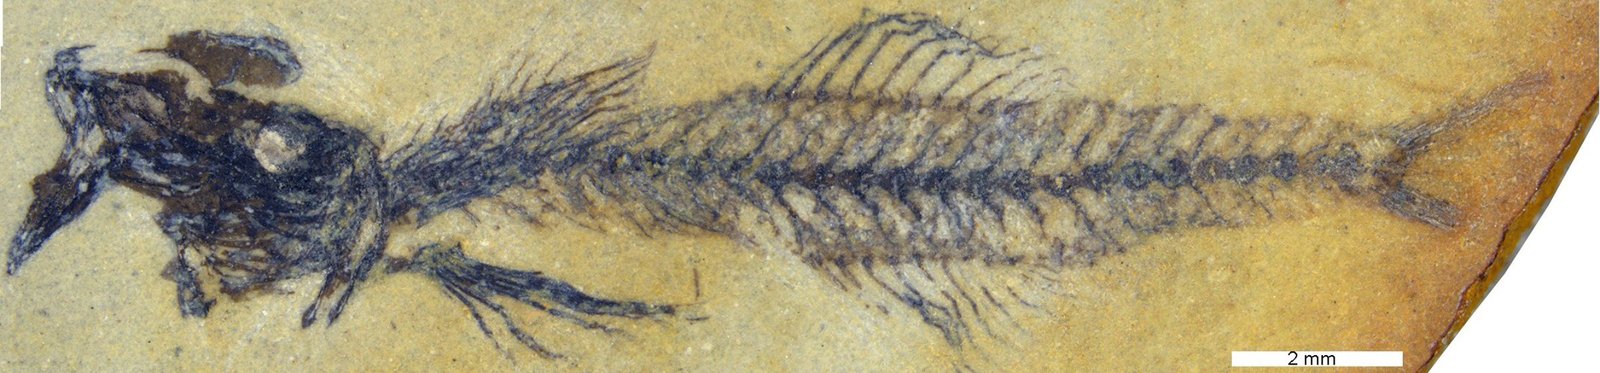 New Genus Discovered – Paleontologists Unearth 18-Million-Year-Old Goby Fossil